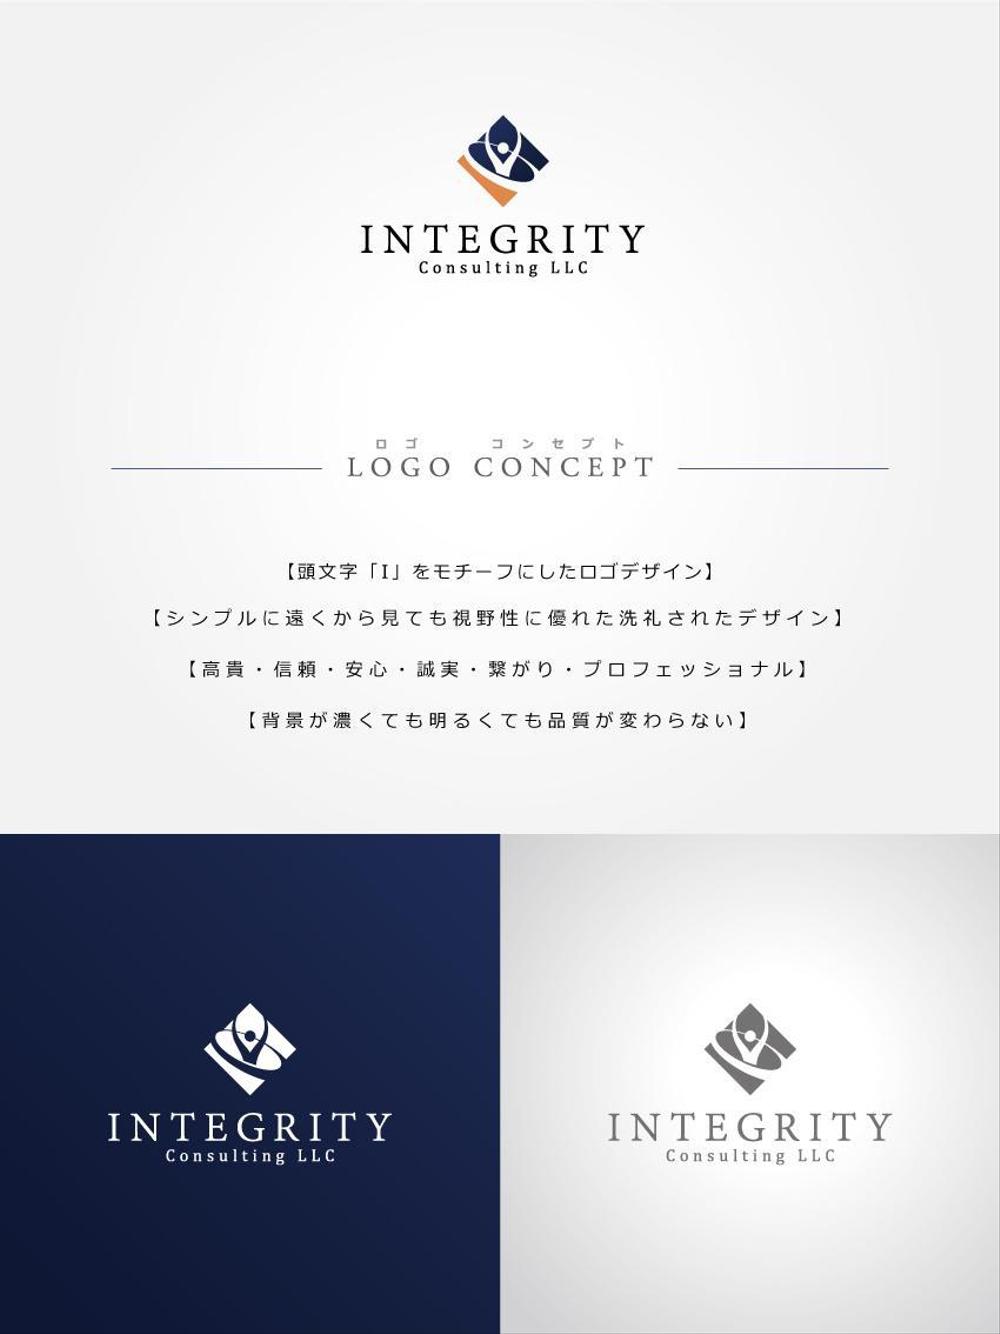 Integrity-Consulting.jpg